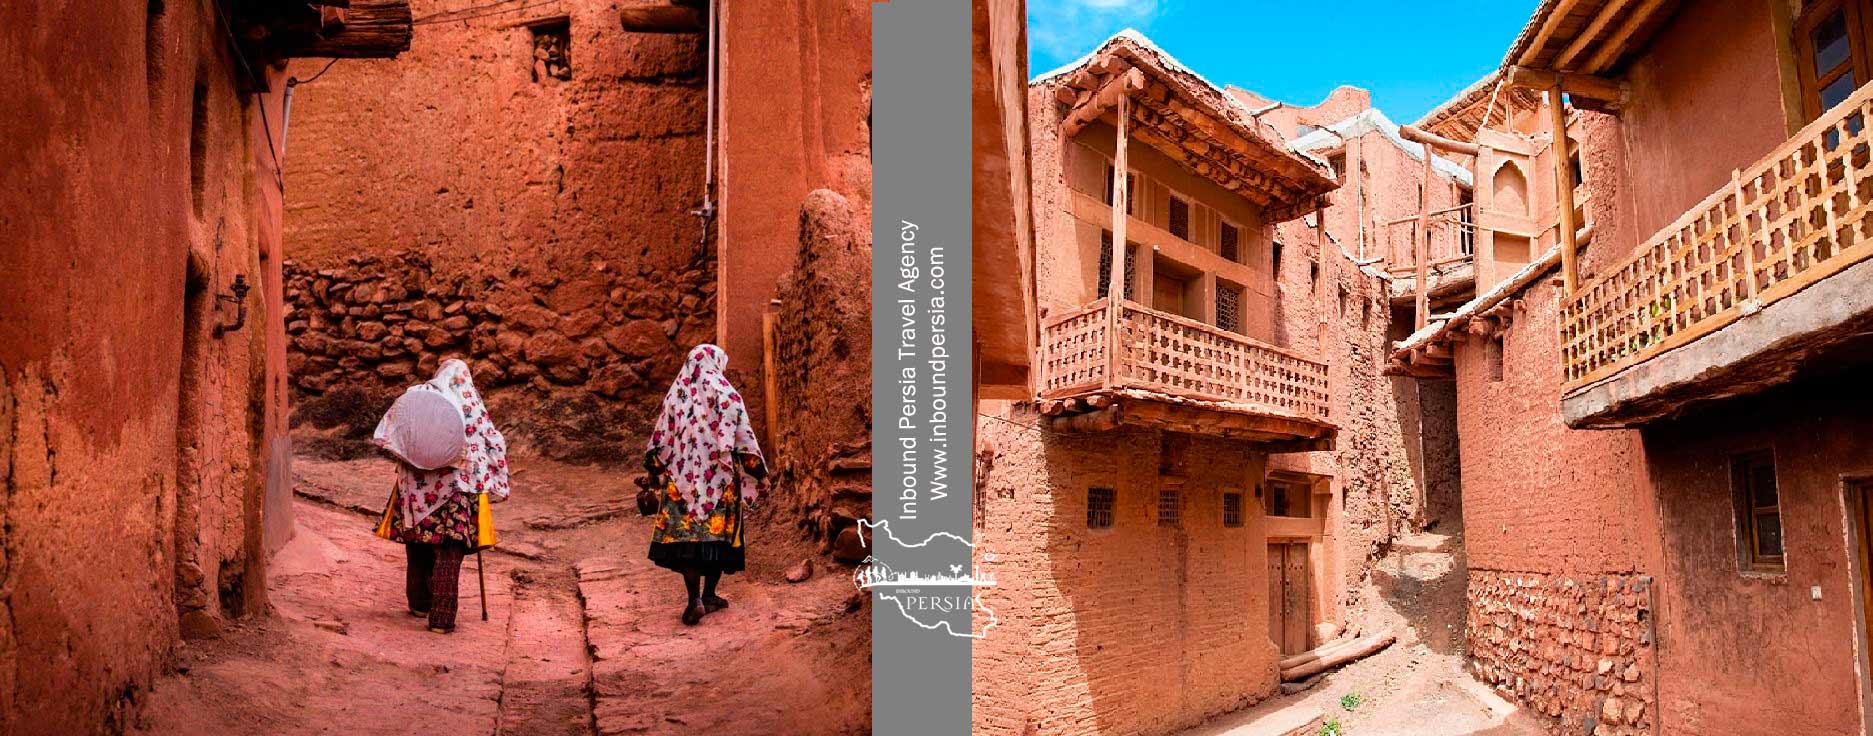 Tour to Abyaneh village , Inbound Persia Travel Agency.